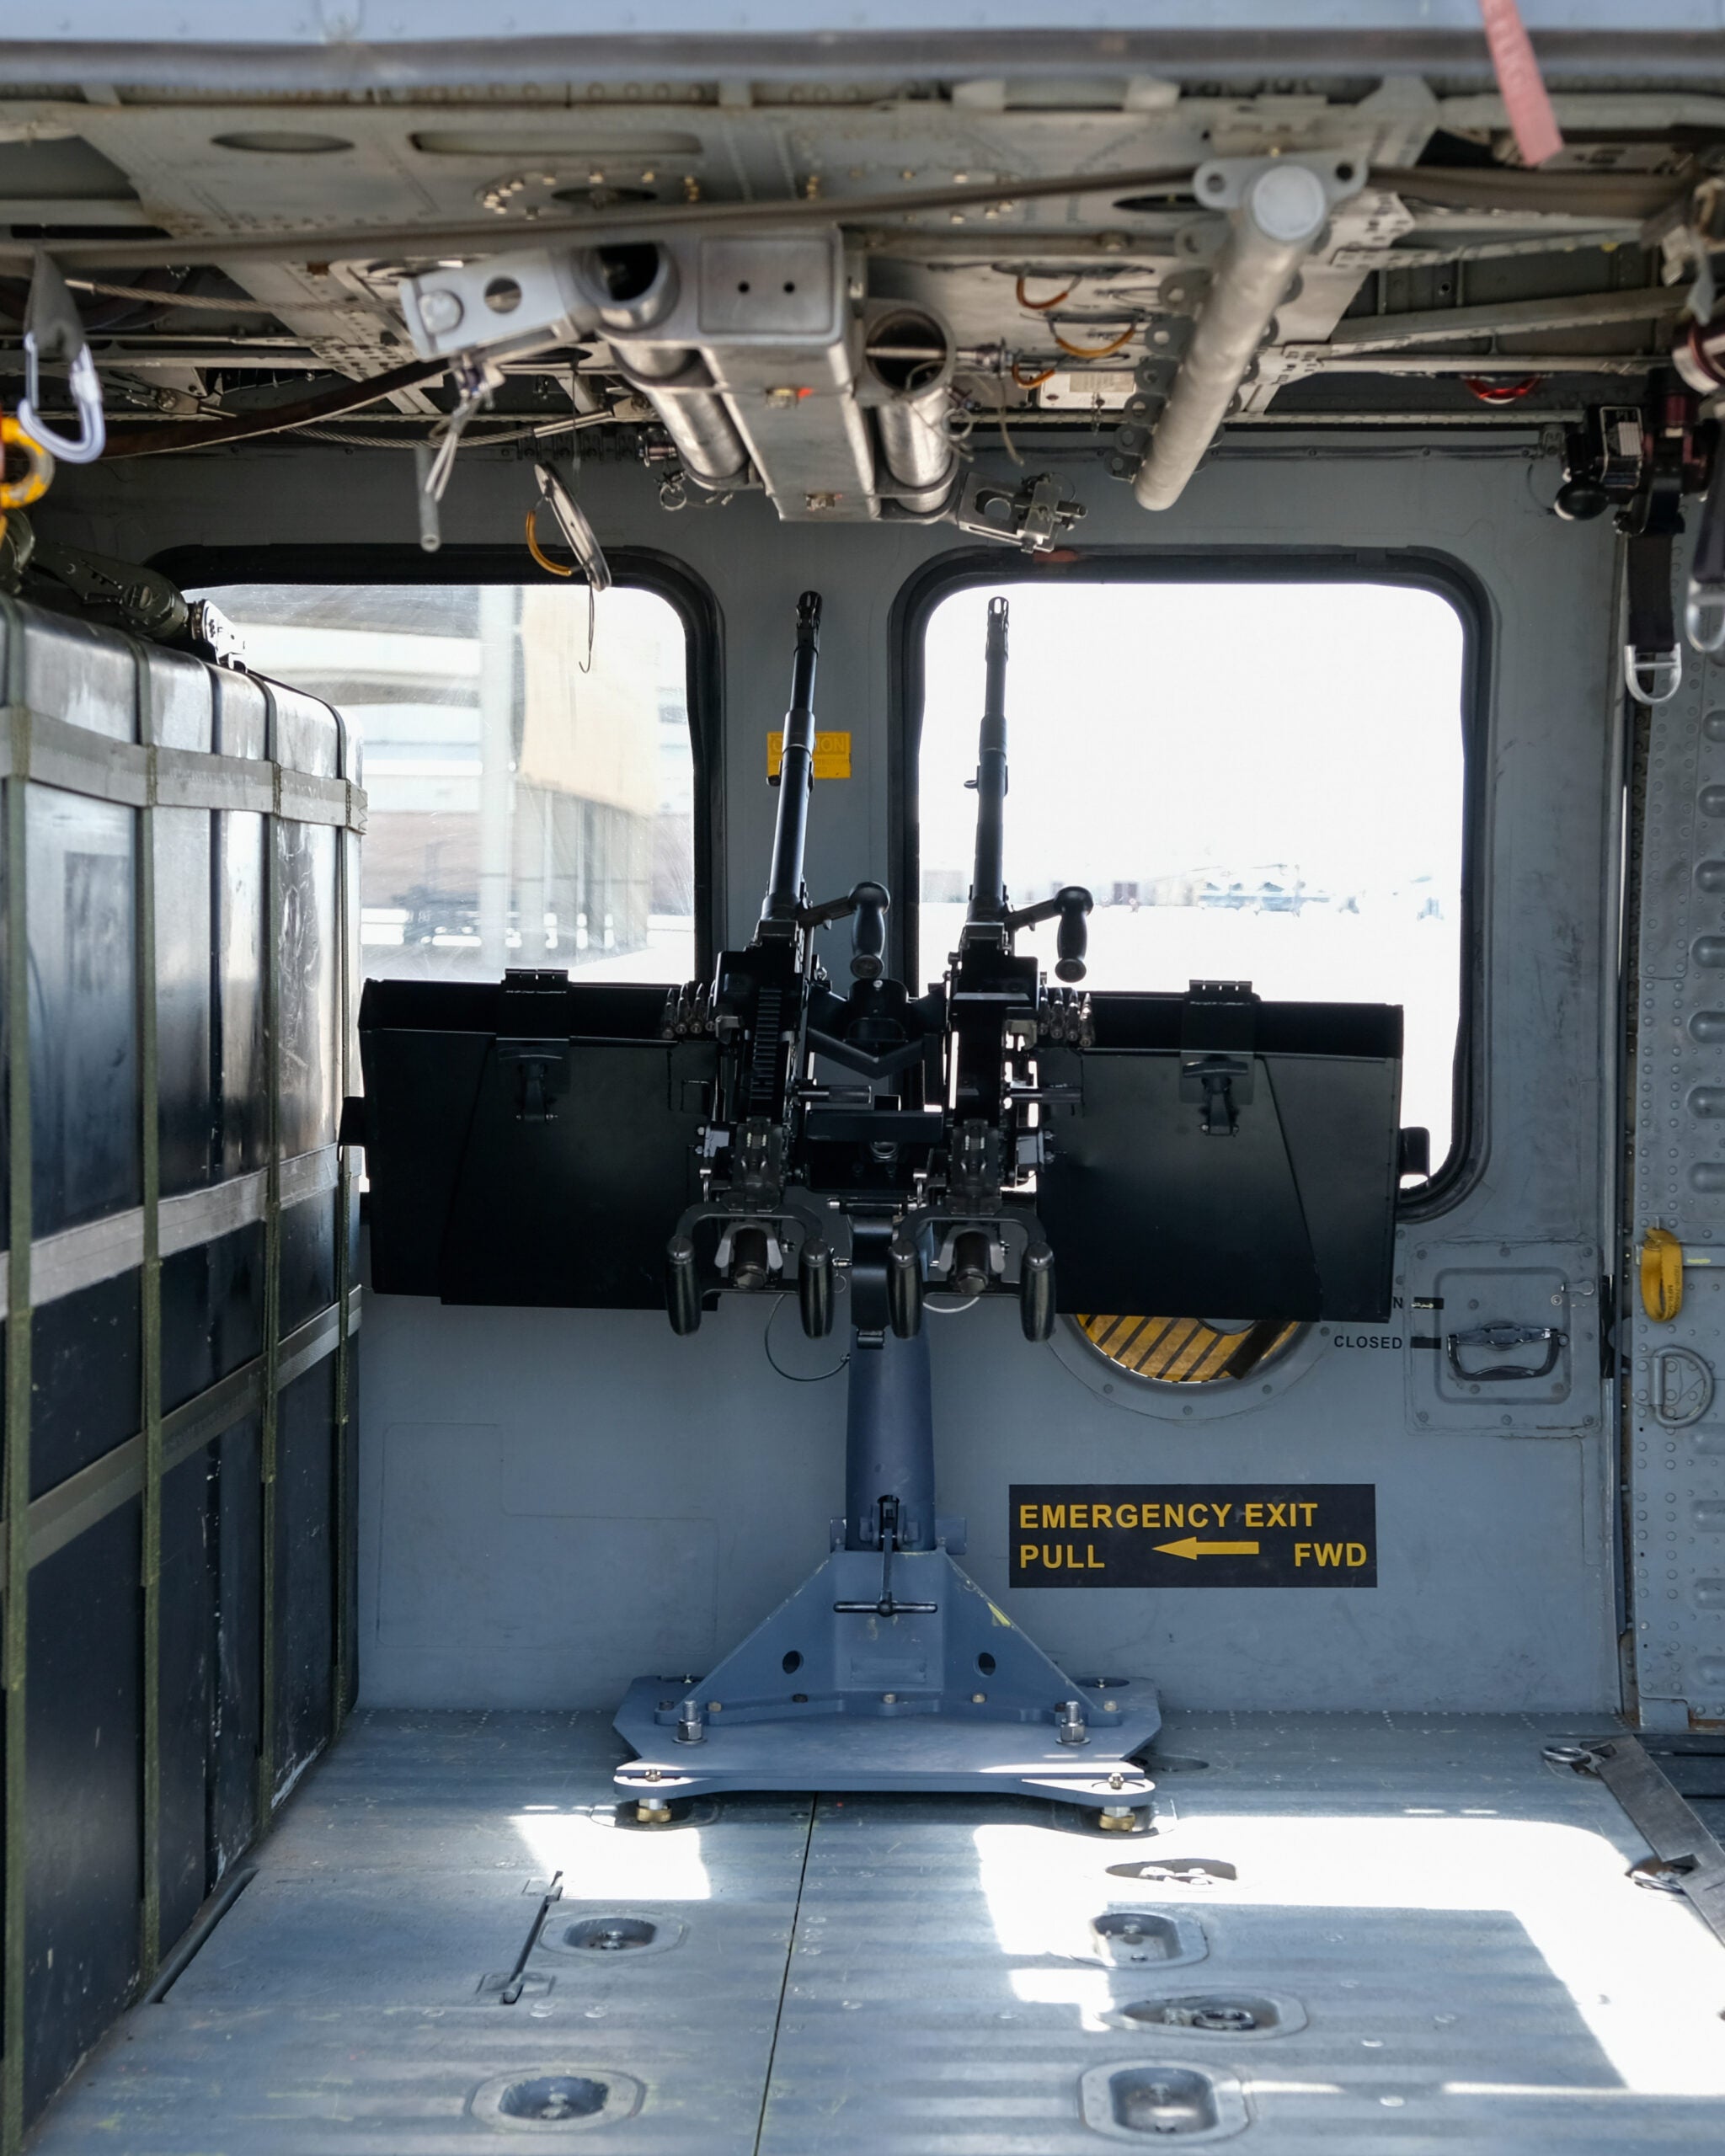 Two M240s are mounted inside an HH-60G Pave Hawk helicopter Nov. 22, 2022, at Davis-Monthan Air Force Base, Arizona. The 943d Rescue Group designed a concept to mount four additional M240 machine guns onto HH-60G helicopters to provide more firepower to the 920th Rescue Wing’s personnel recovery task force in contested environments. (U.S. Air Force photo by Andre Trinidad)